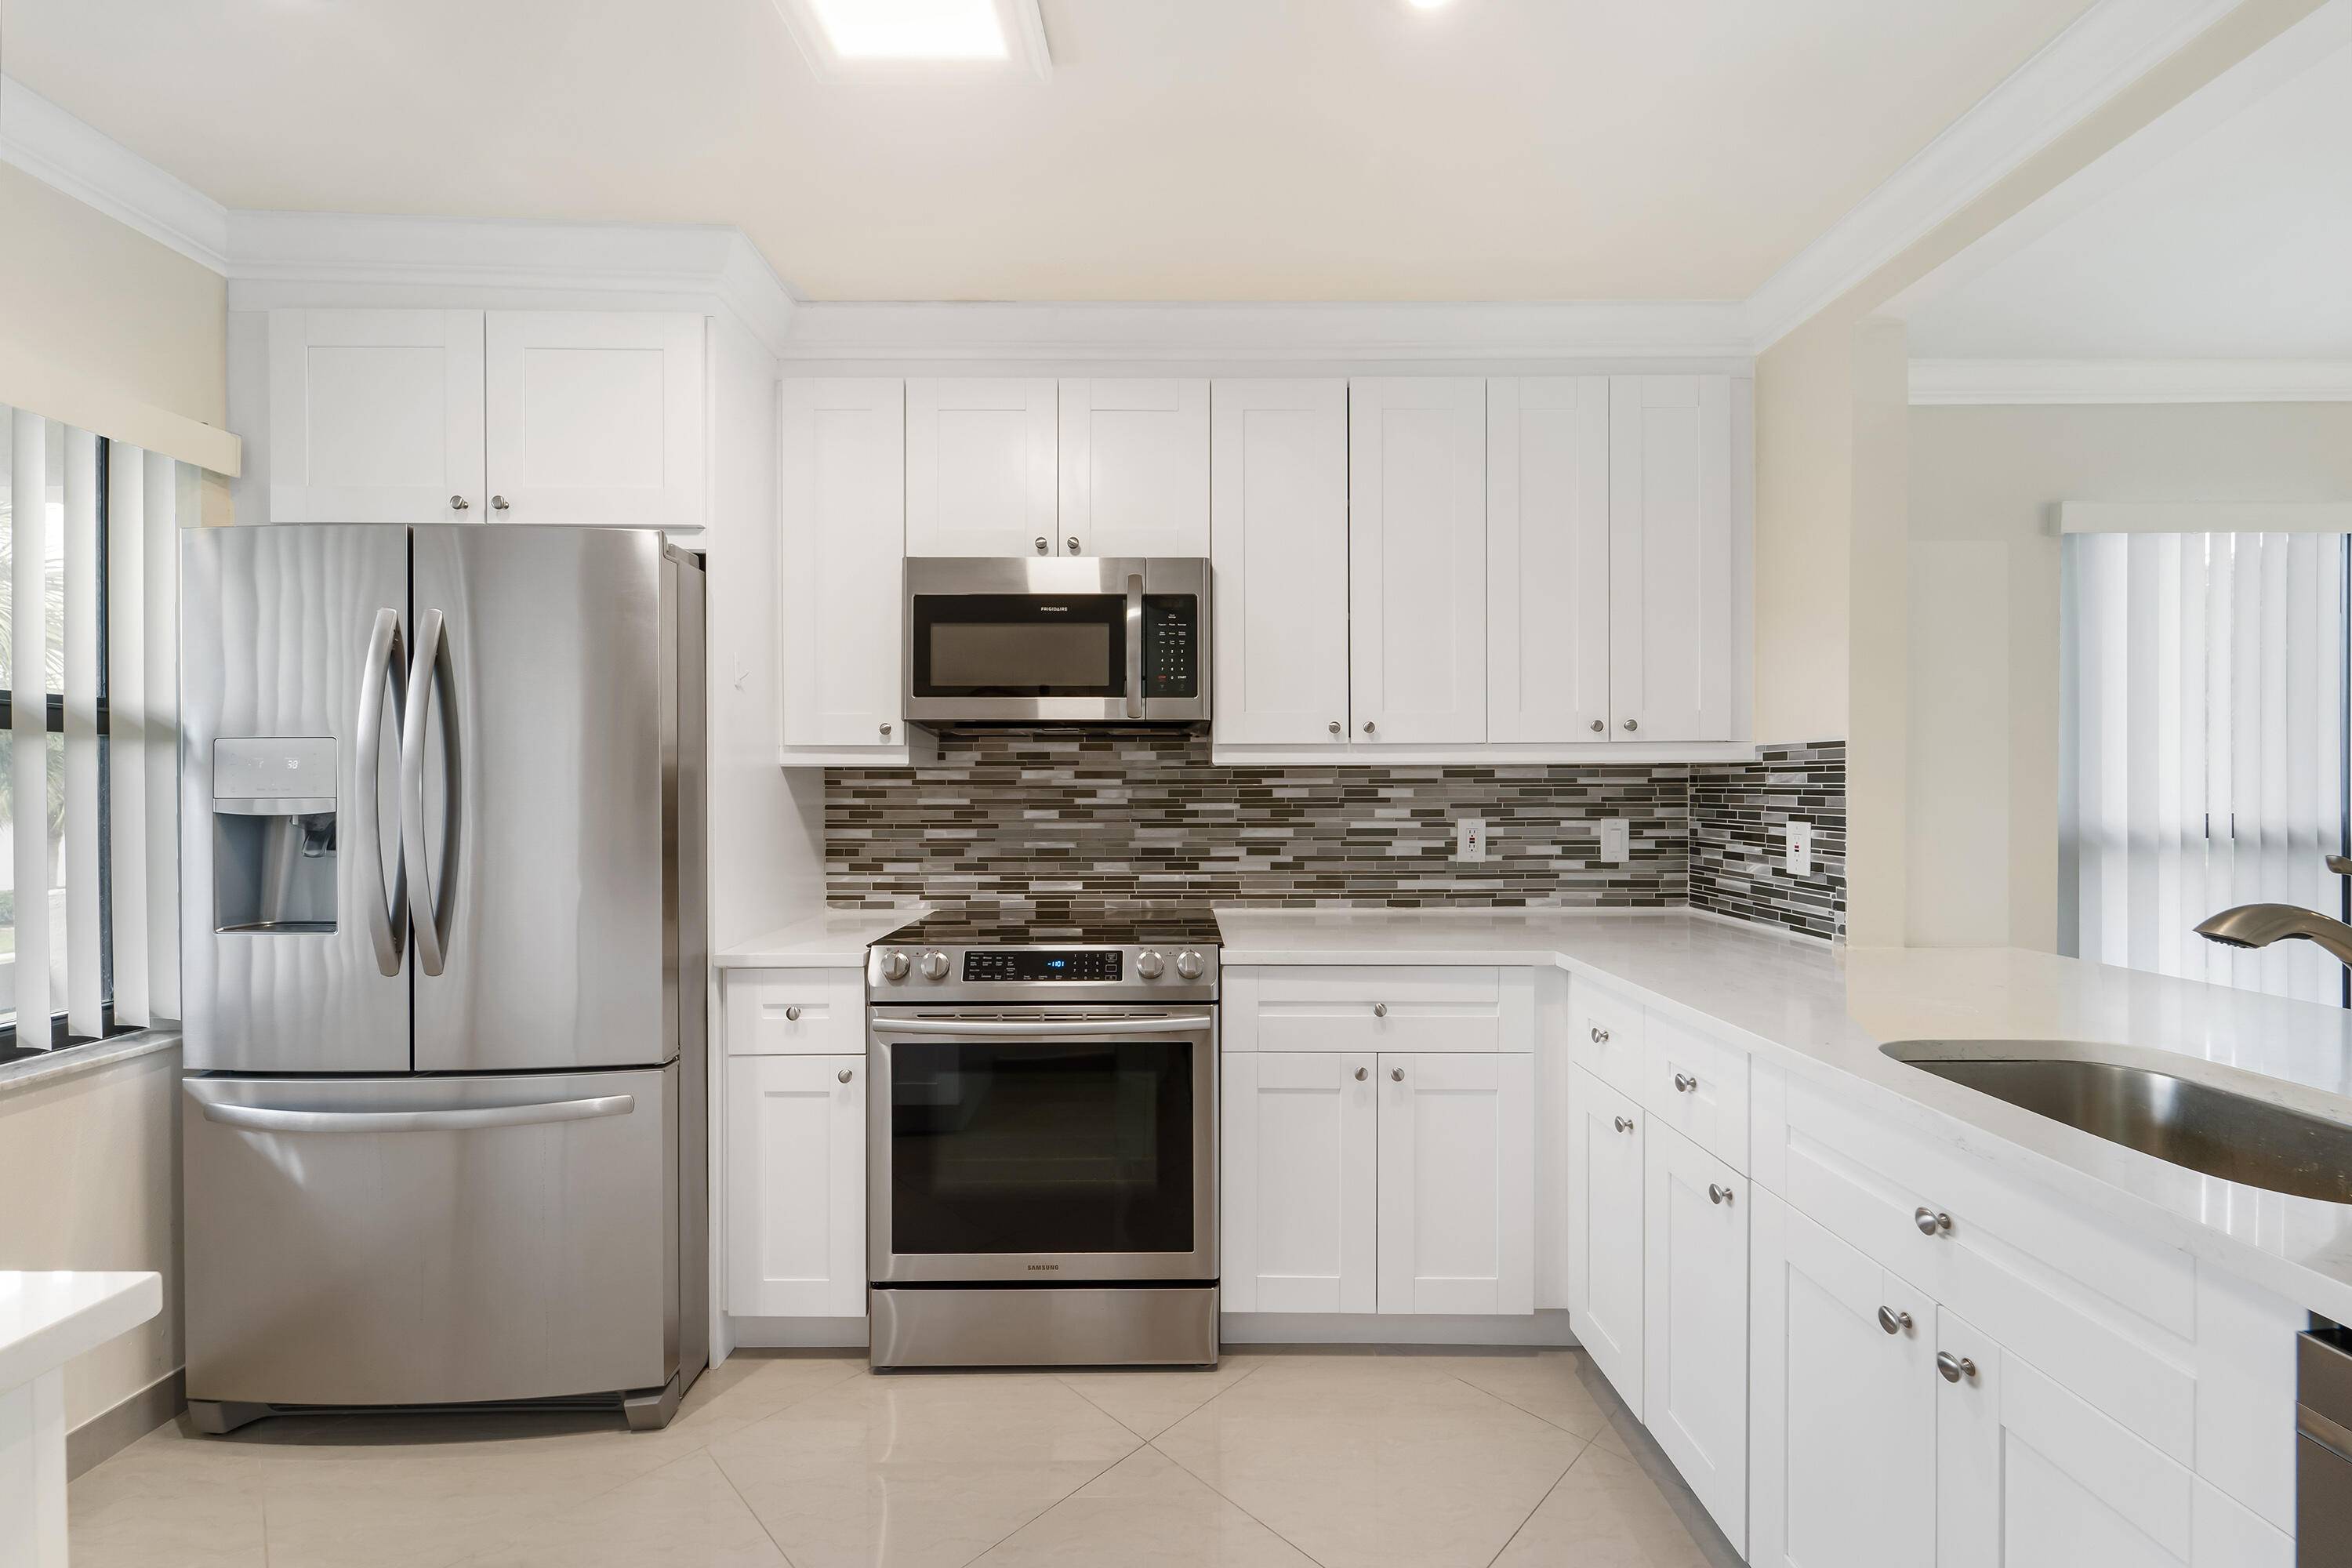 STUNNING UPGRADES ! COMPLETE IMPACT WINDOWS, NEW ROOF 2022, CORNER UNIT, 2022 whirlpool dishwasher, NEWER 2018 stainless Frigidaire refrigerator, oven microwave.